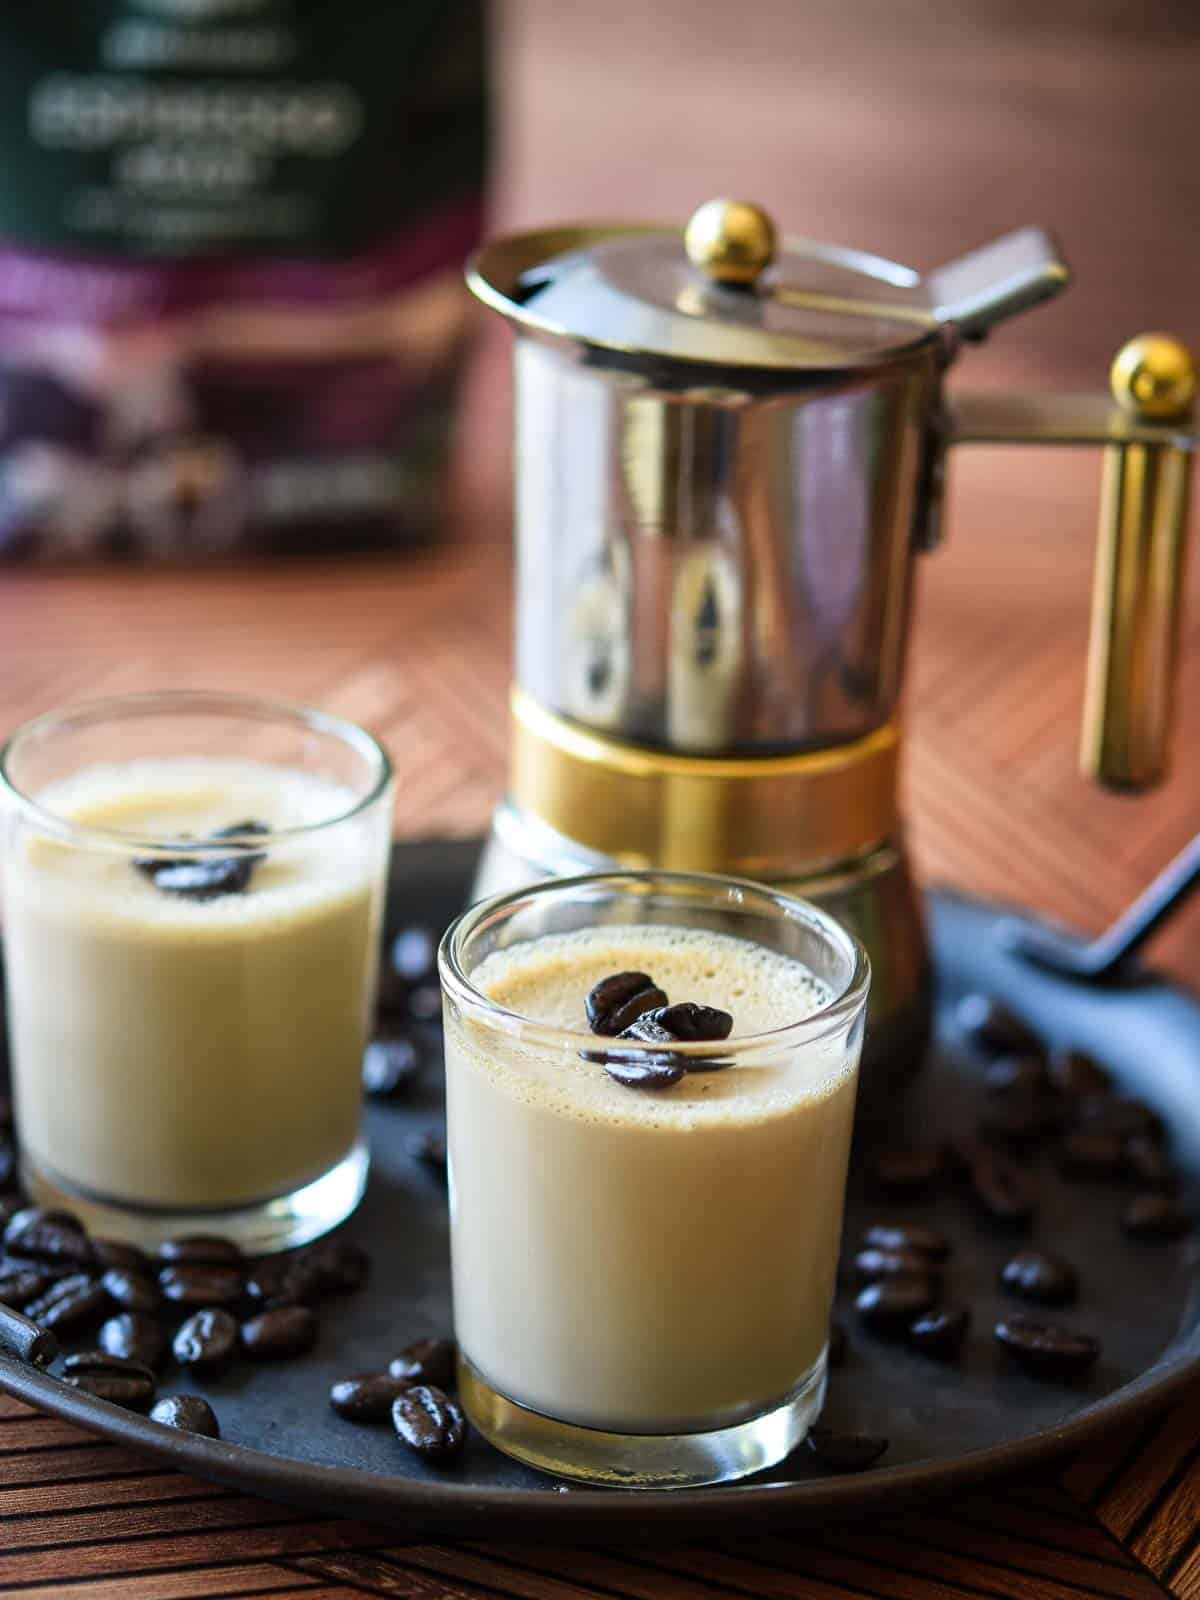 Espresso panna cotta in small glass jars with coffee in the background.